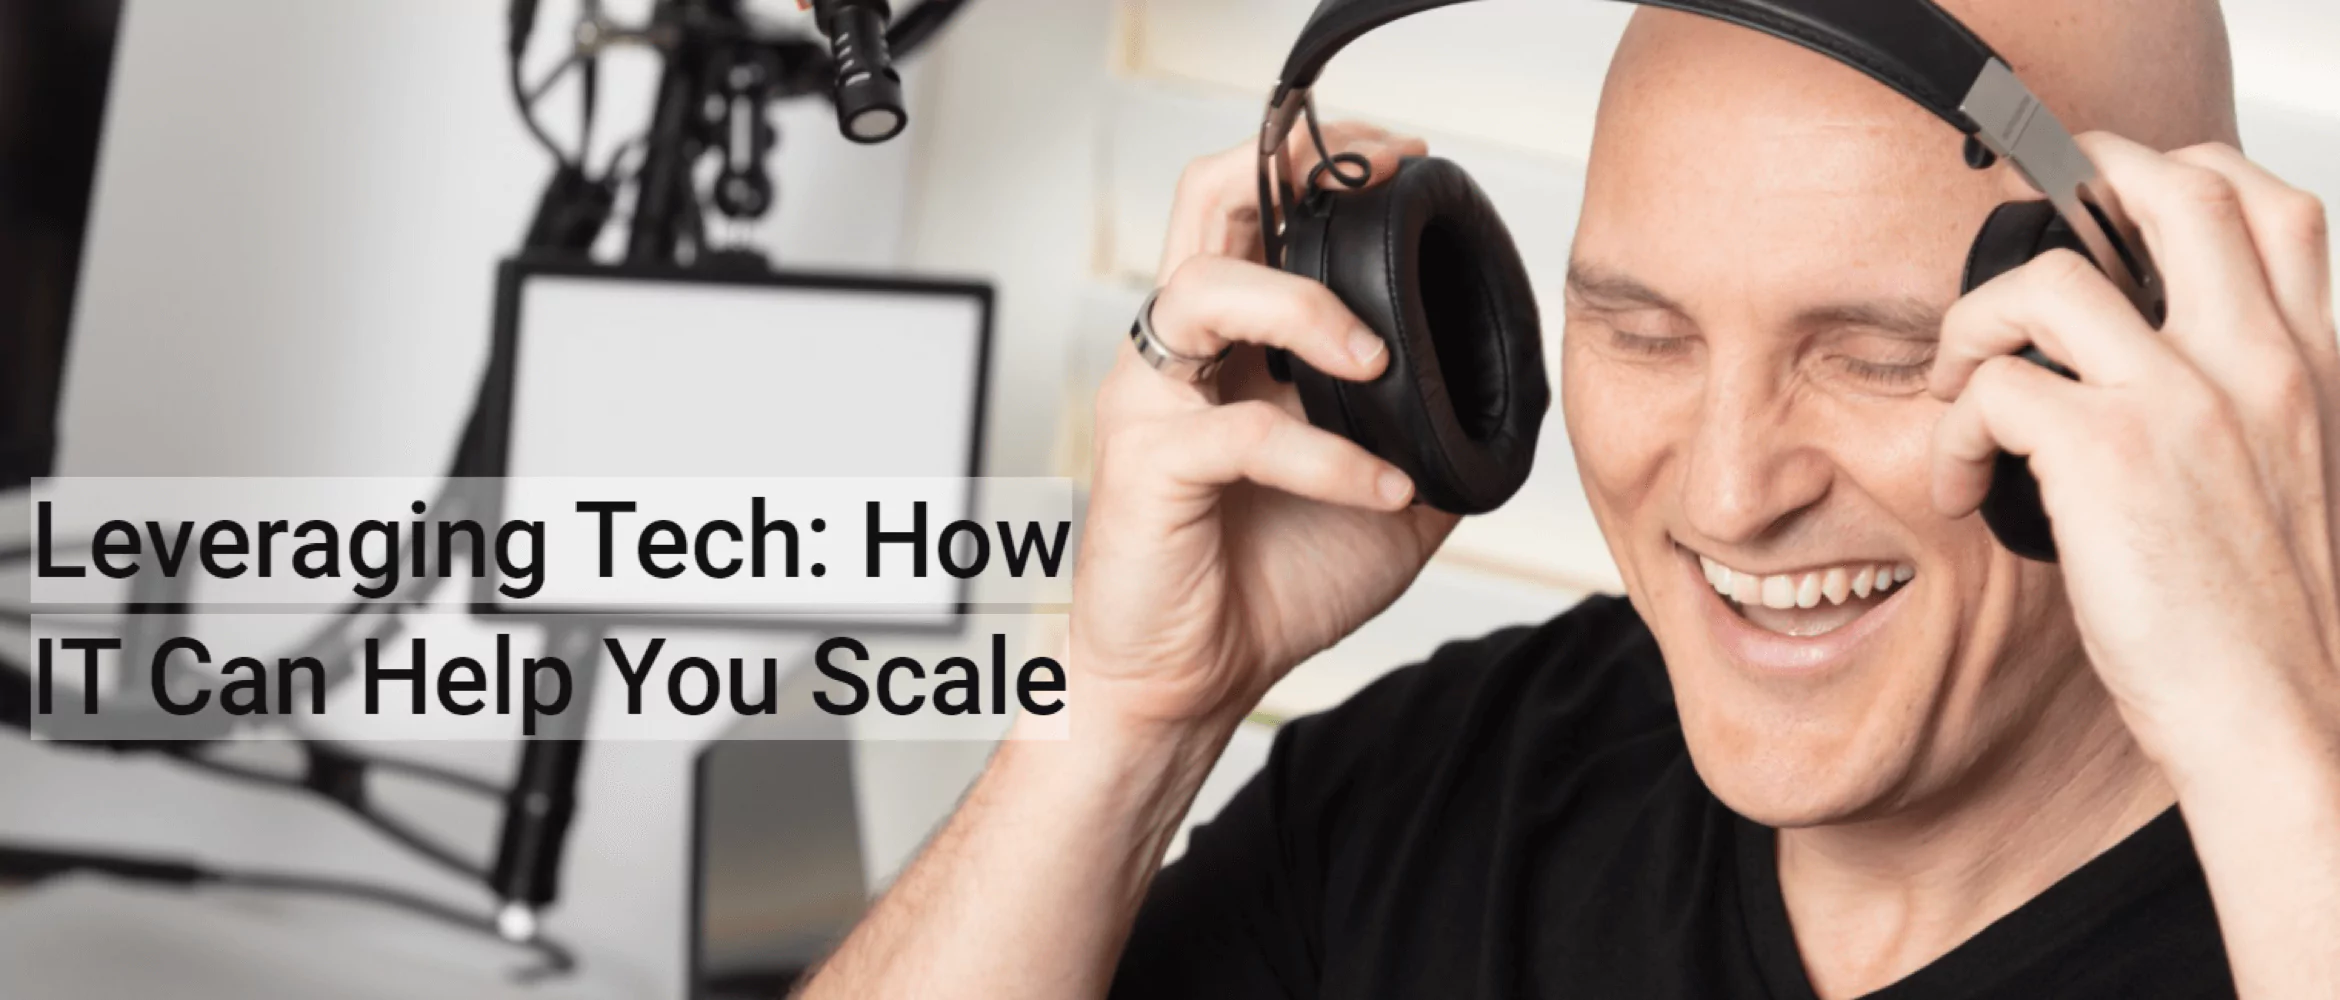 Podcast on How IT Can Help You Scale Your Business Effectively